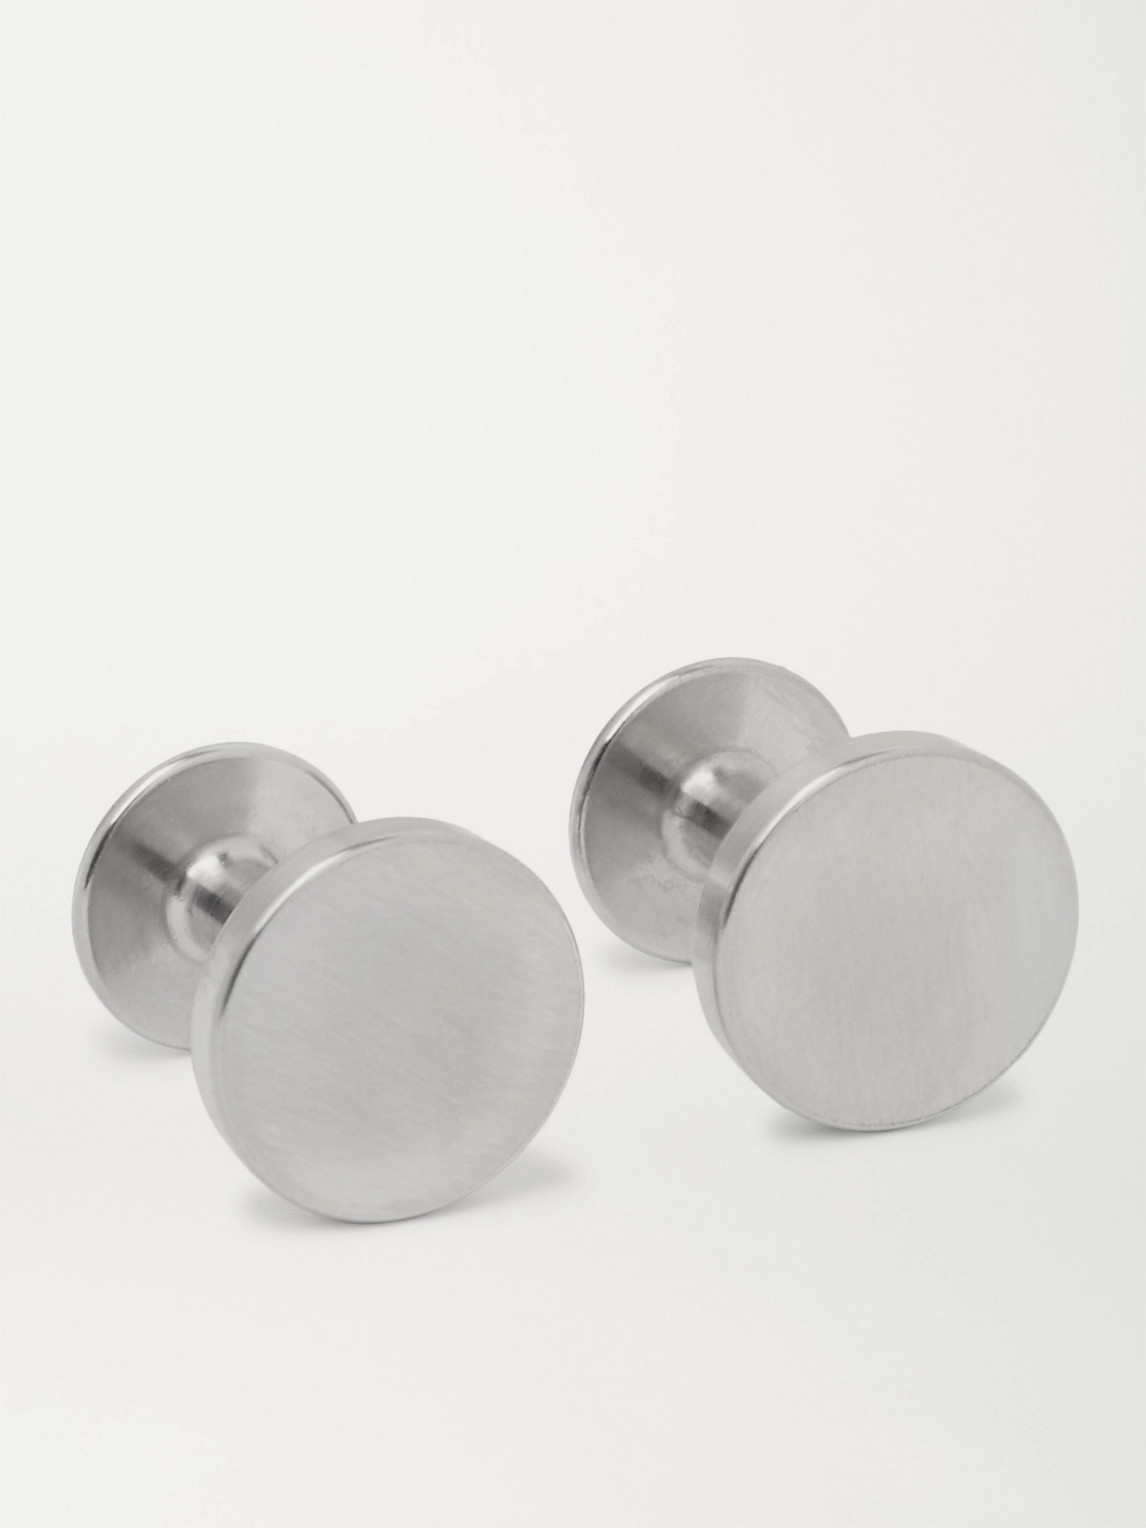 Alice Made This Brushed Stainless Steel Cufflinks In Silver